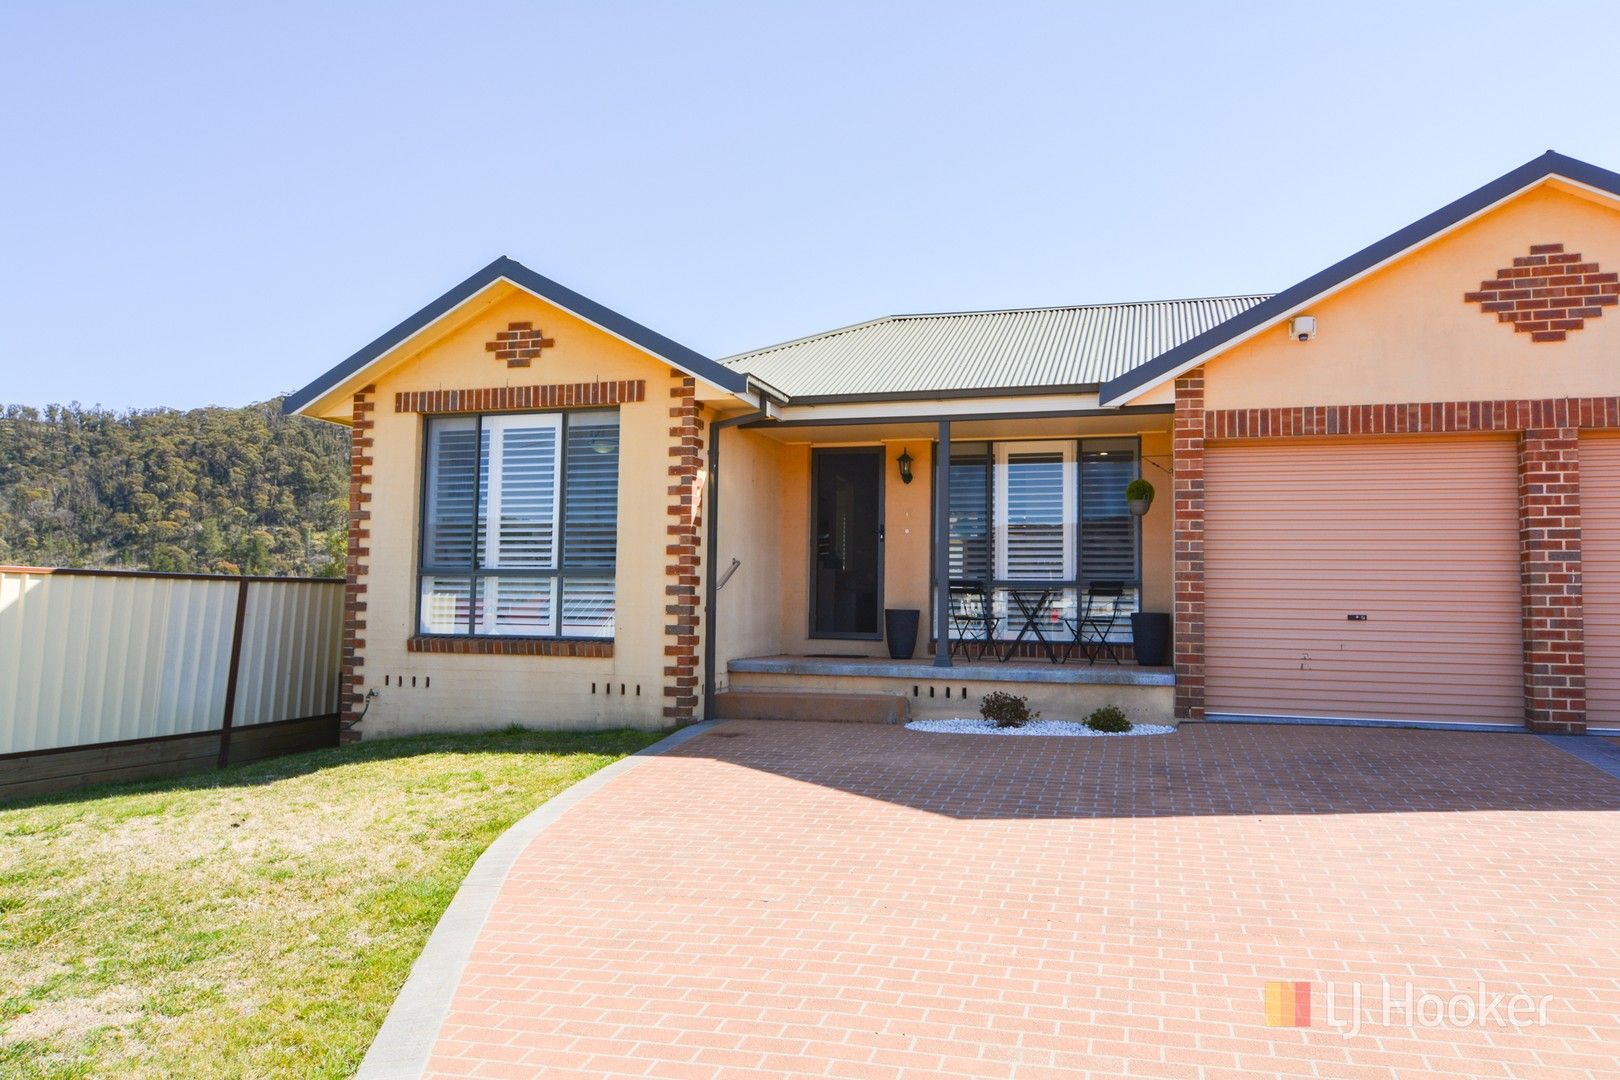 2 bedrooms Villa in 1/25 Hoskins Avenue LITHGOW NSW, 2790